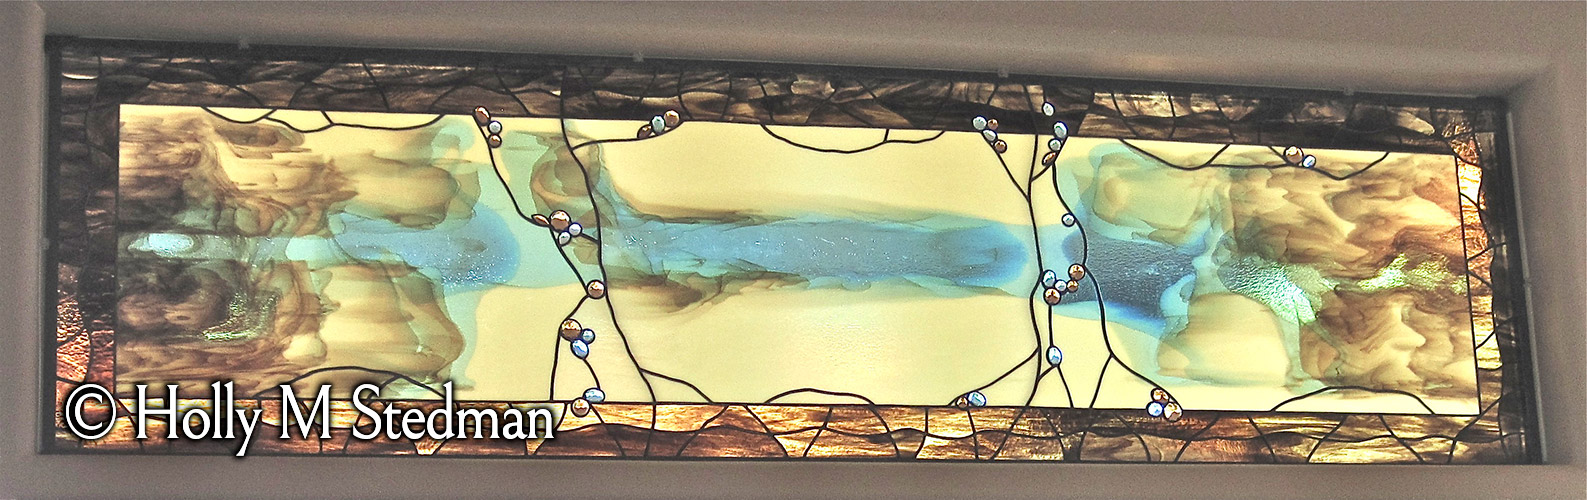 Large stained glass window with mottled colors